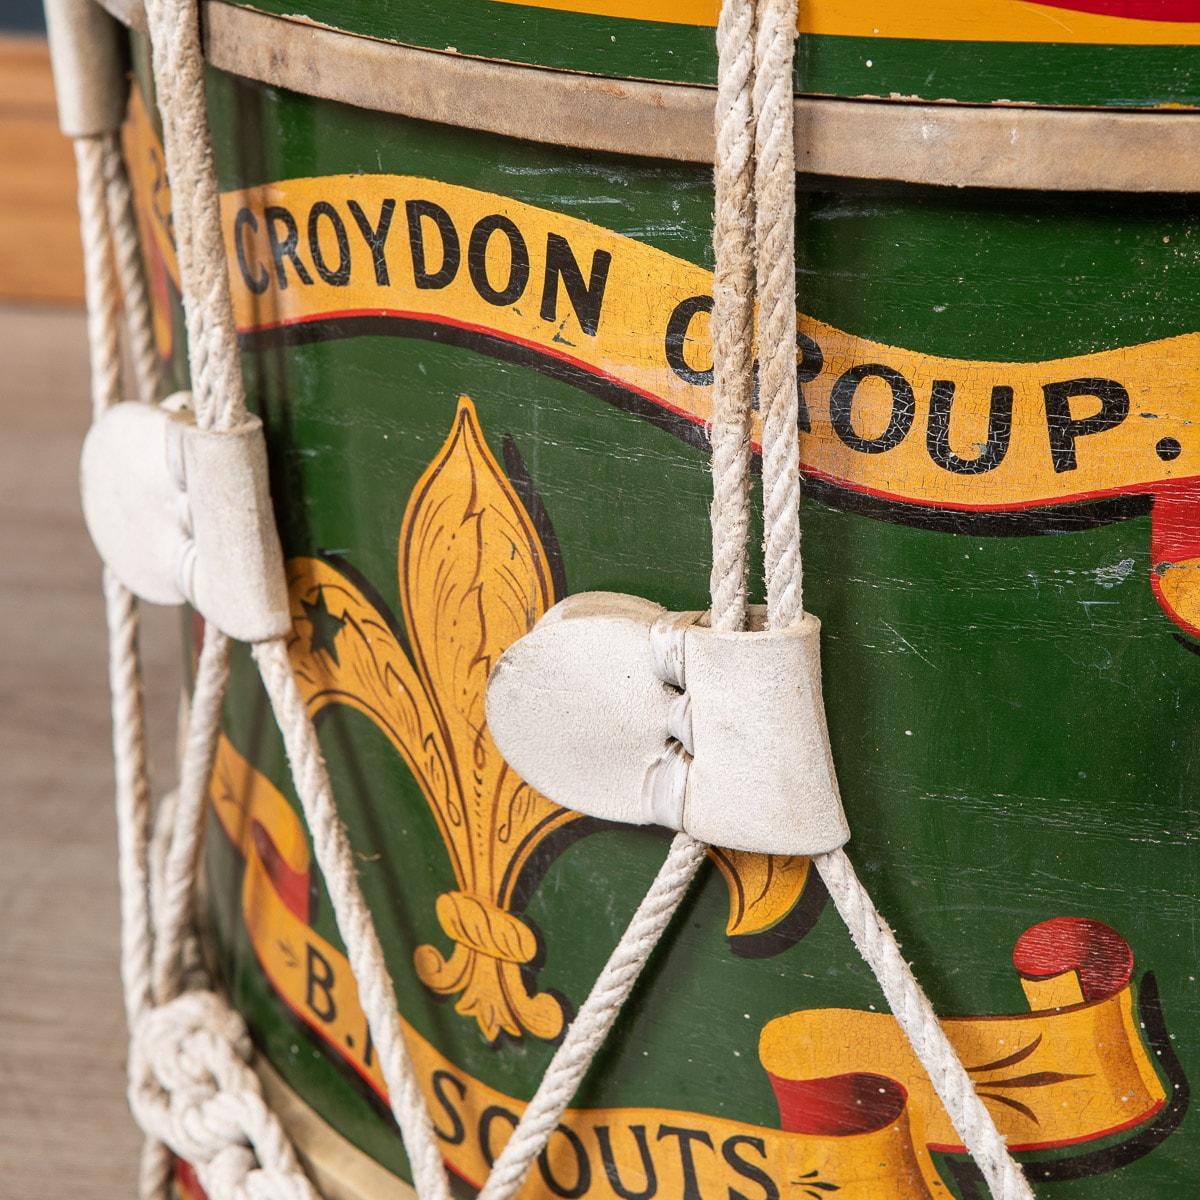 20th Century British Ceremonial Drum from the 22nd Croydon Group 2